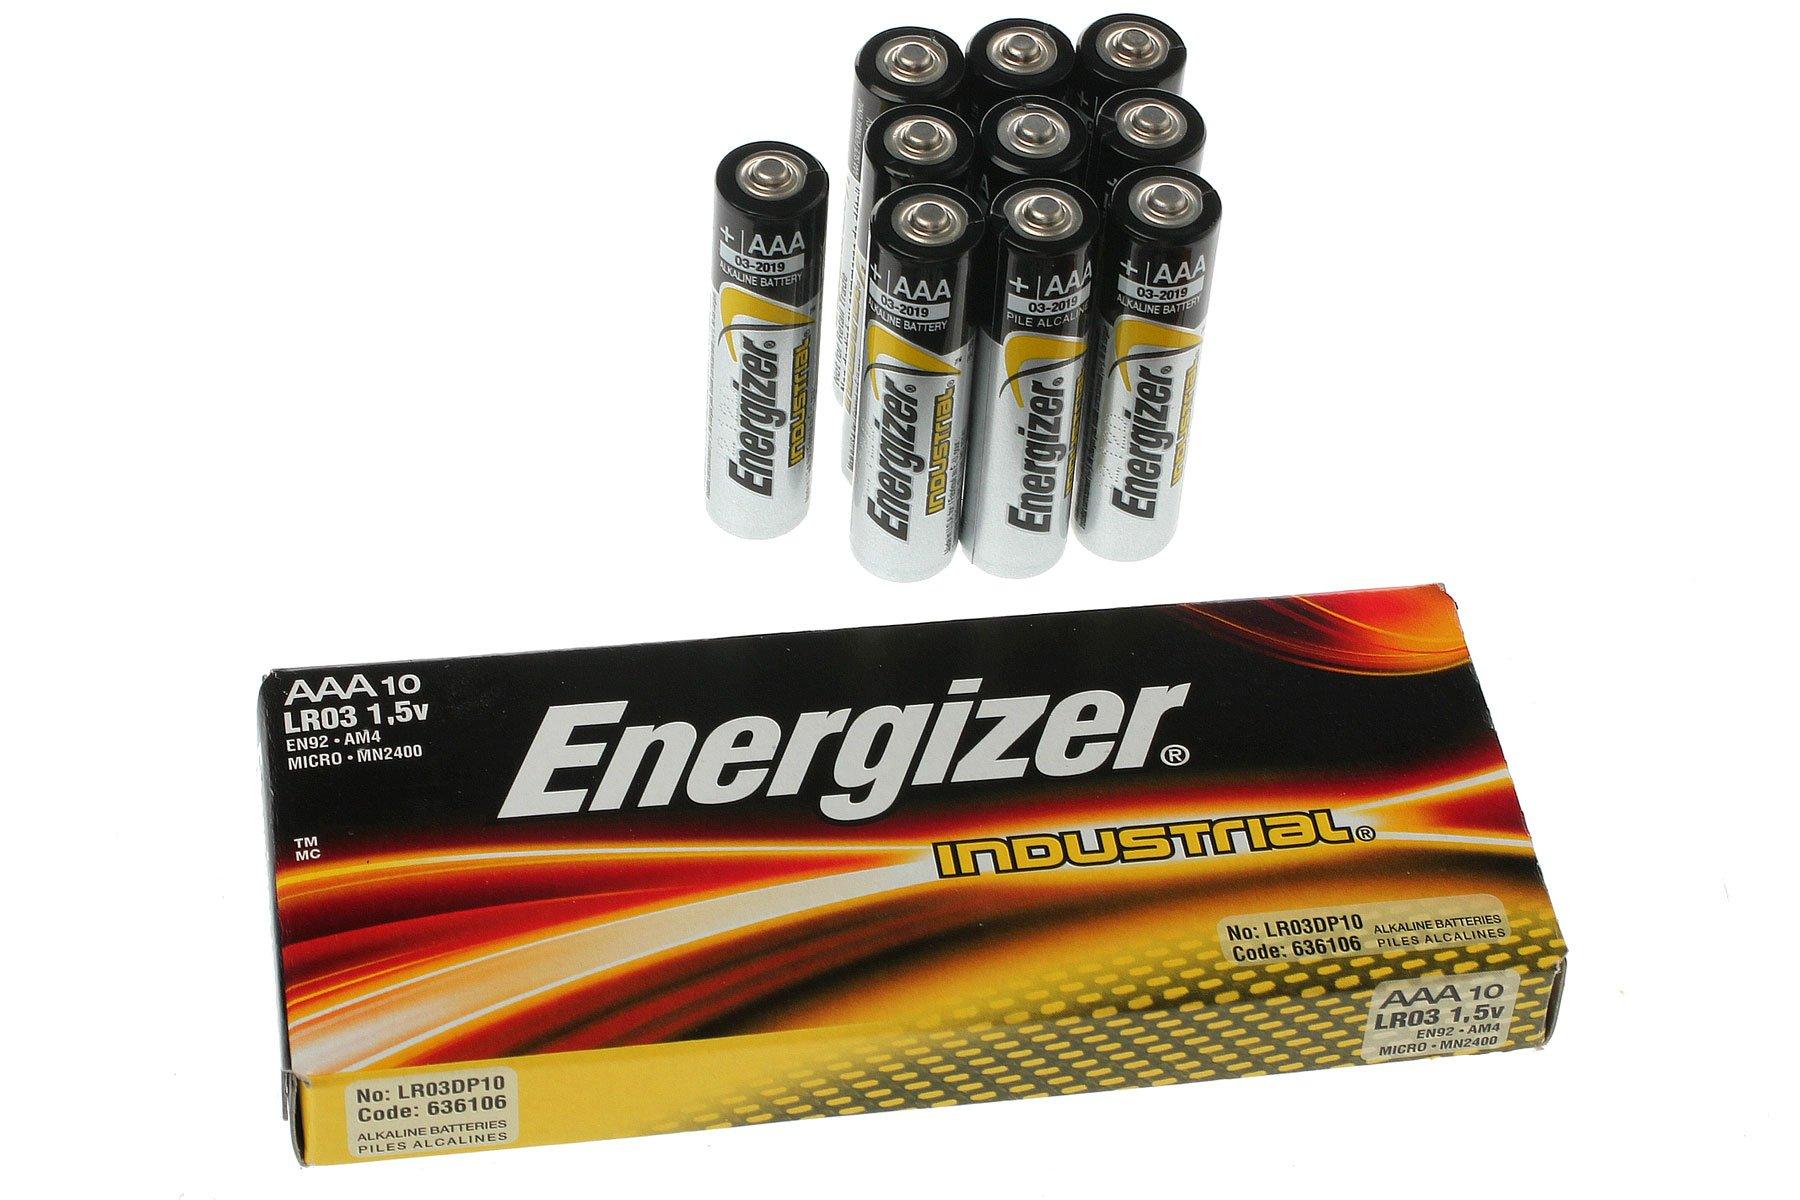 10 pieces Energizer Industrial AAA batteries  Advantageously shopping at